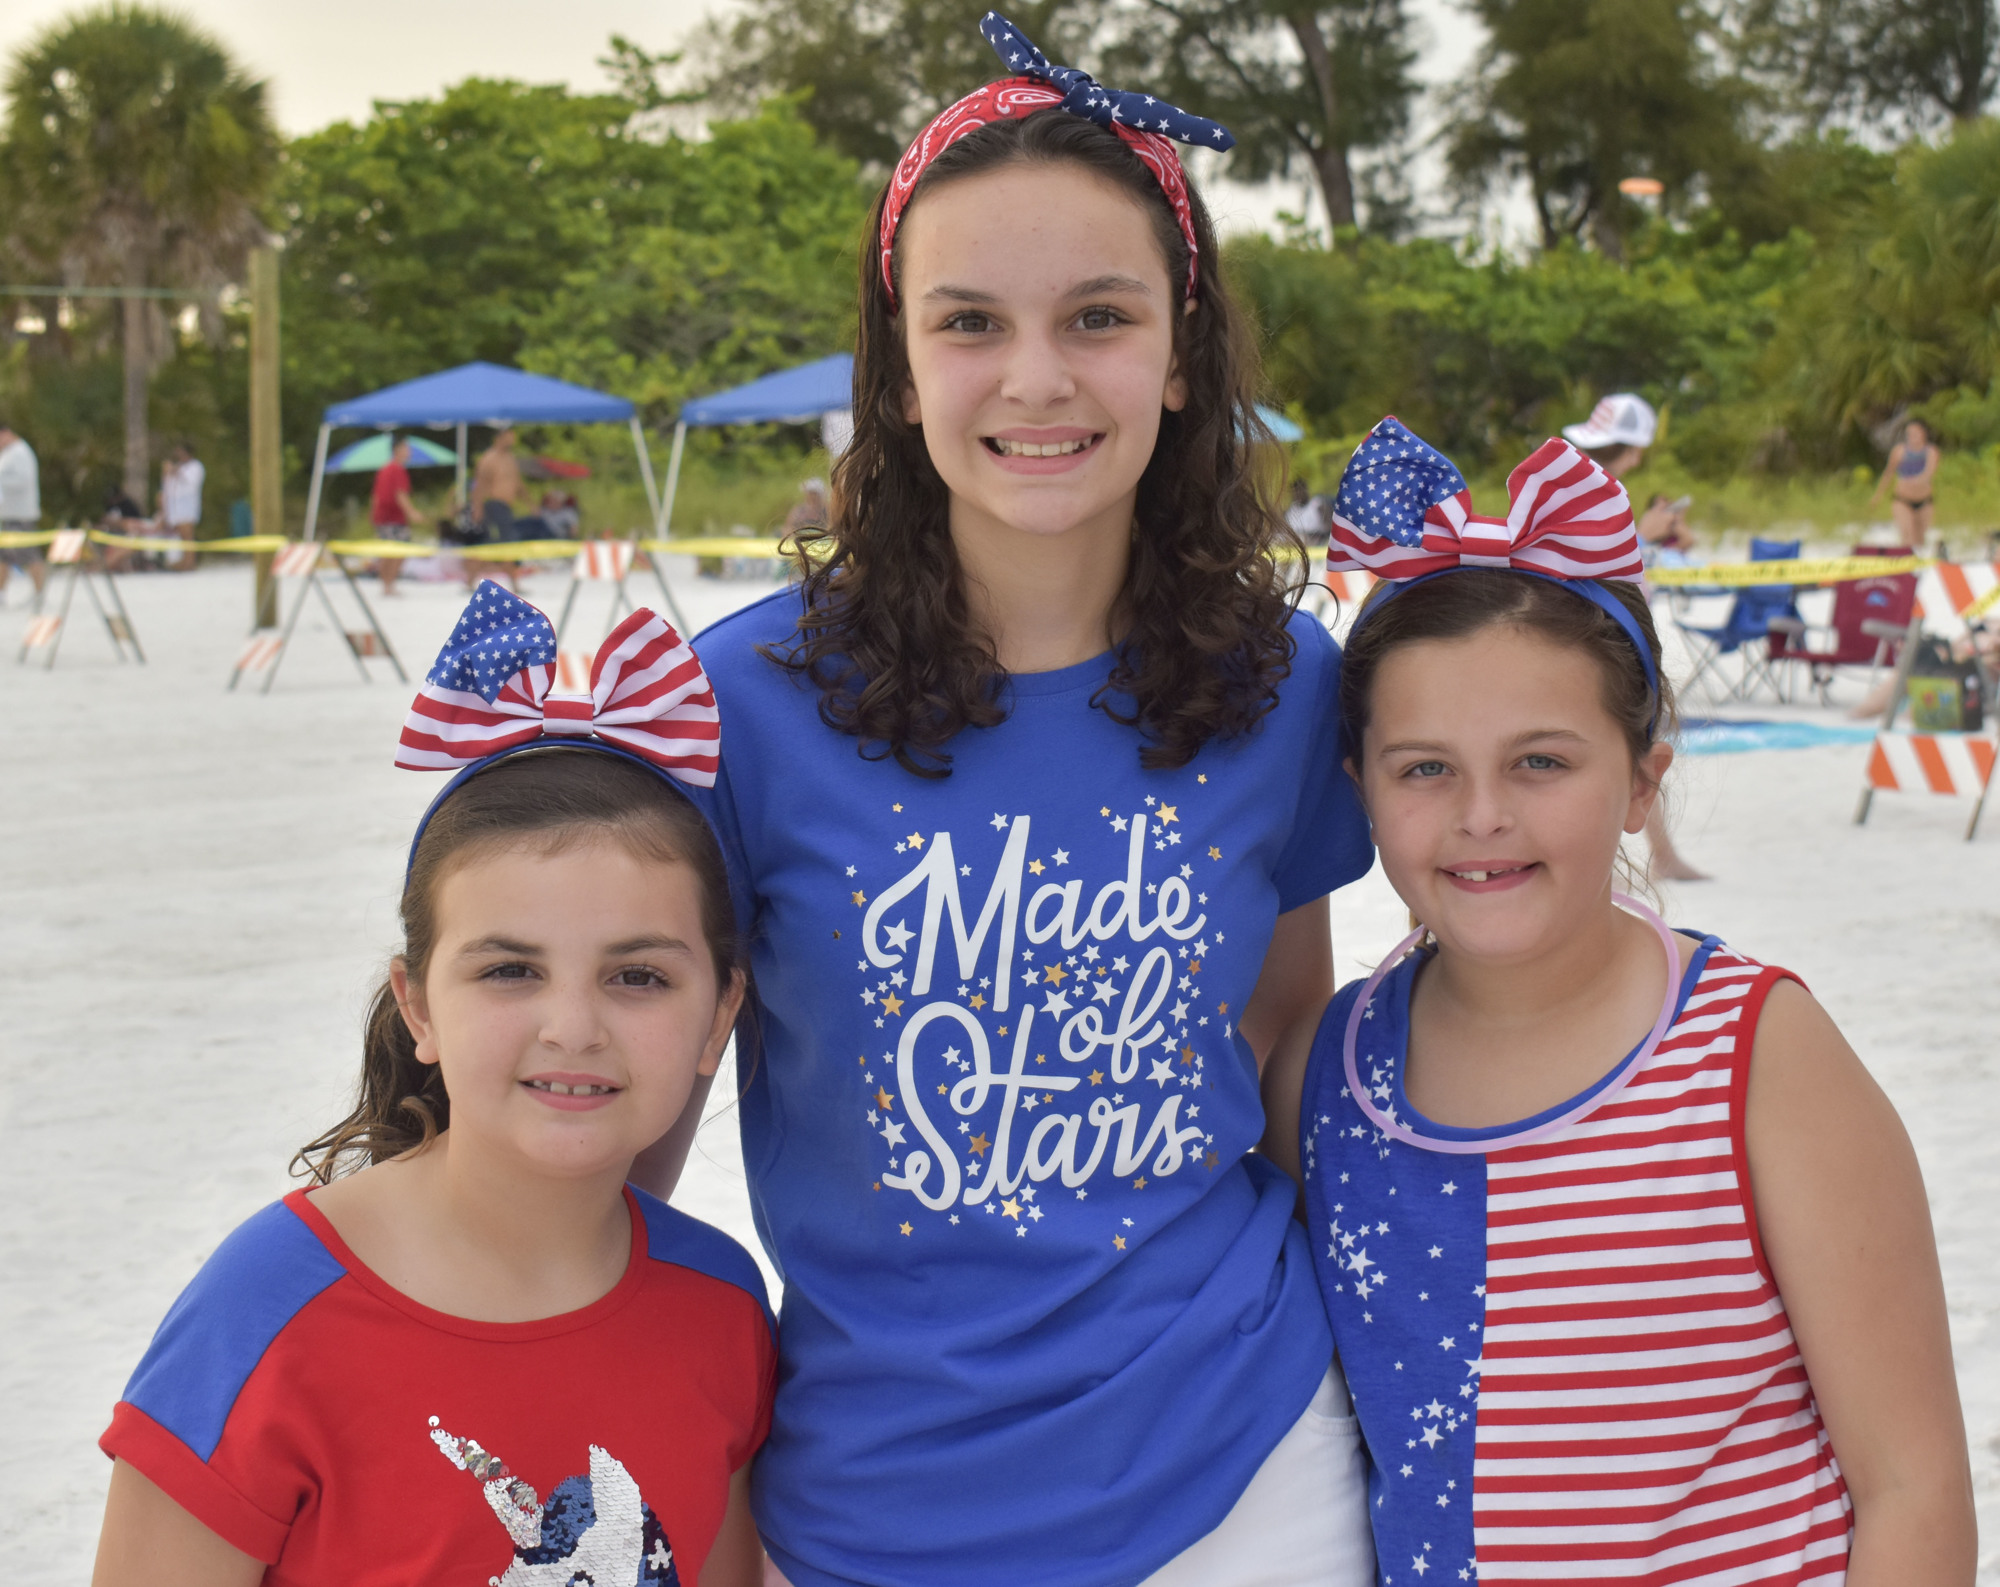 In 2019, Ashlyn, Genevieve and Madeline Pidra enoyed the Siesta Key beach while waiting for the fireworks show to begin.